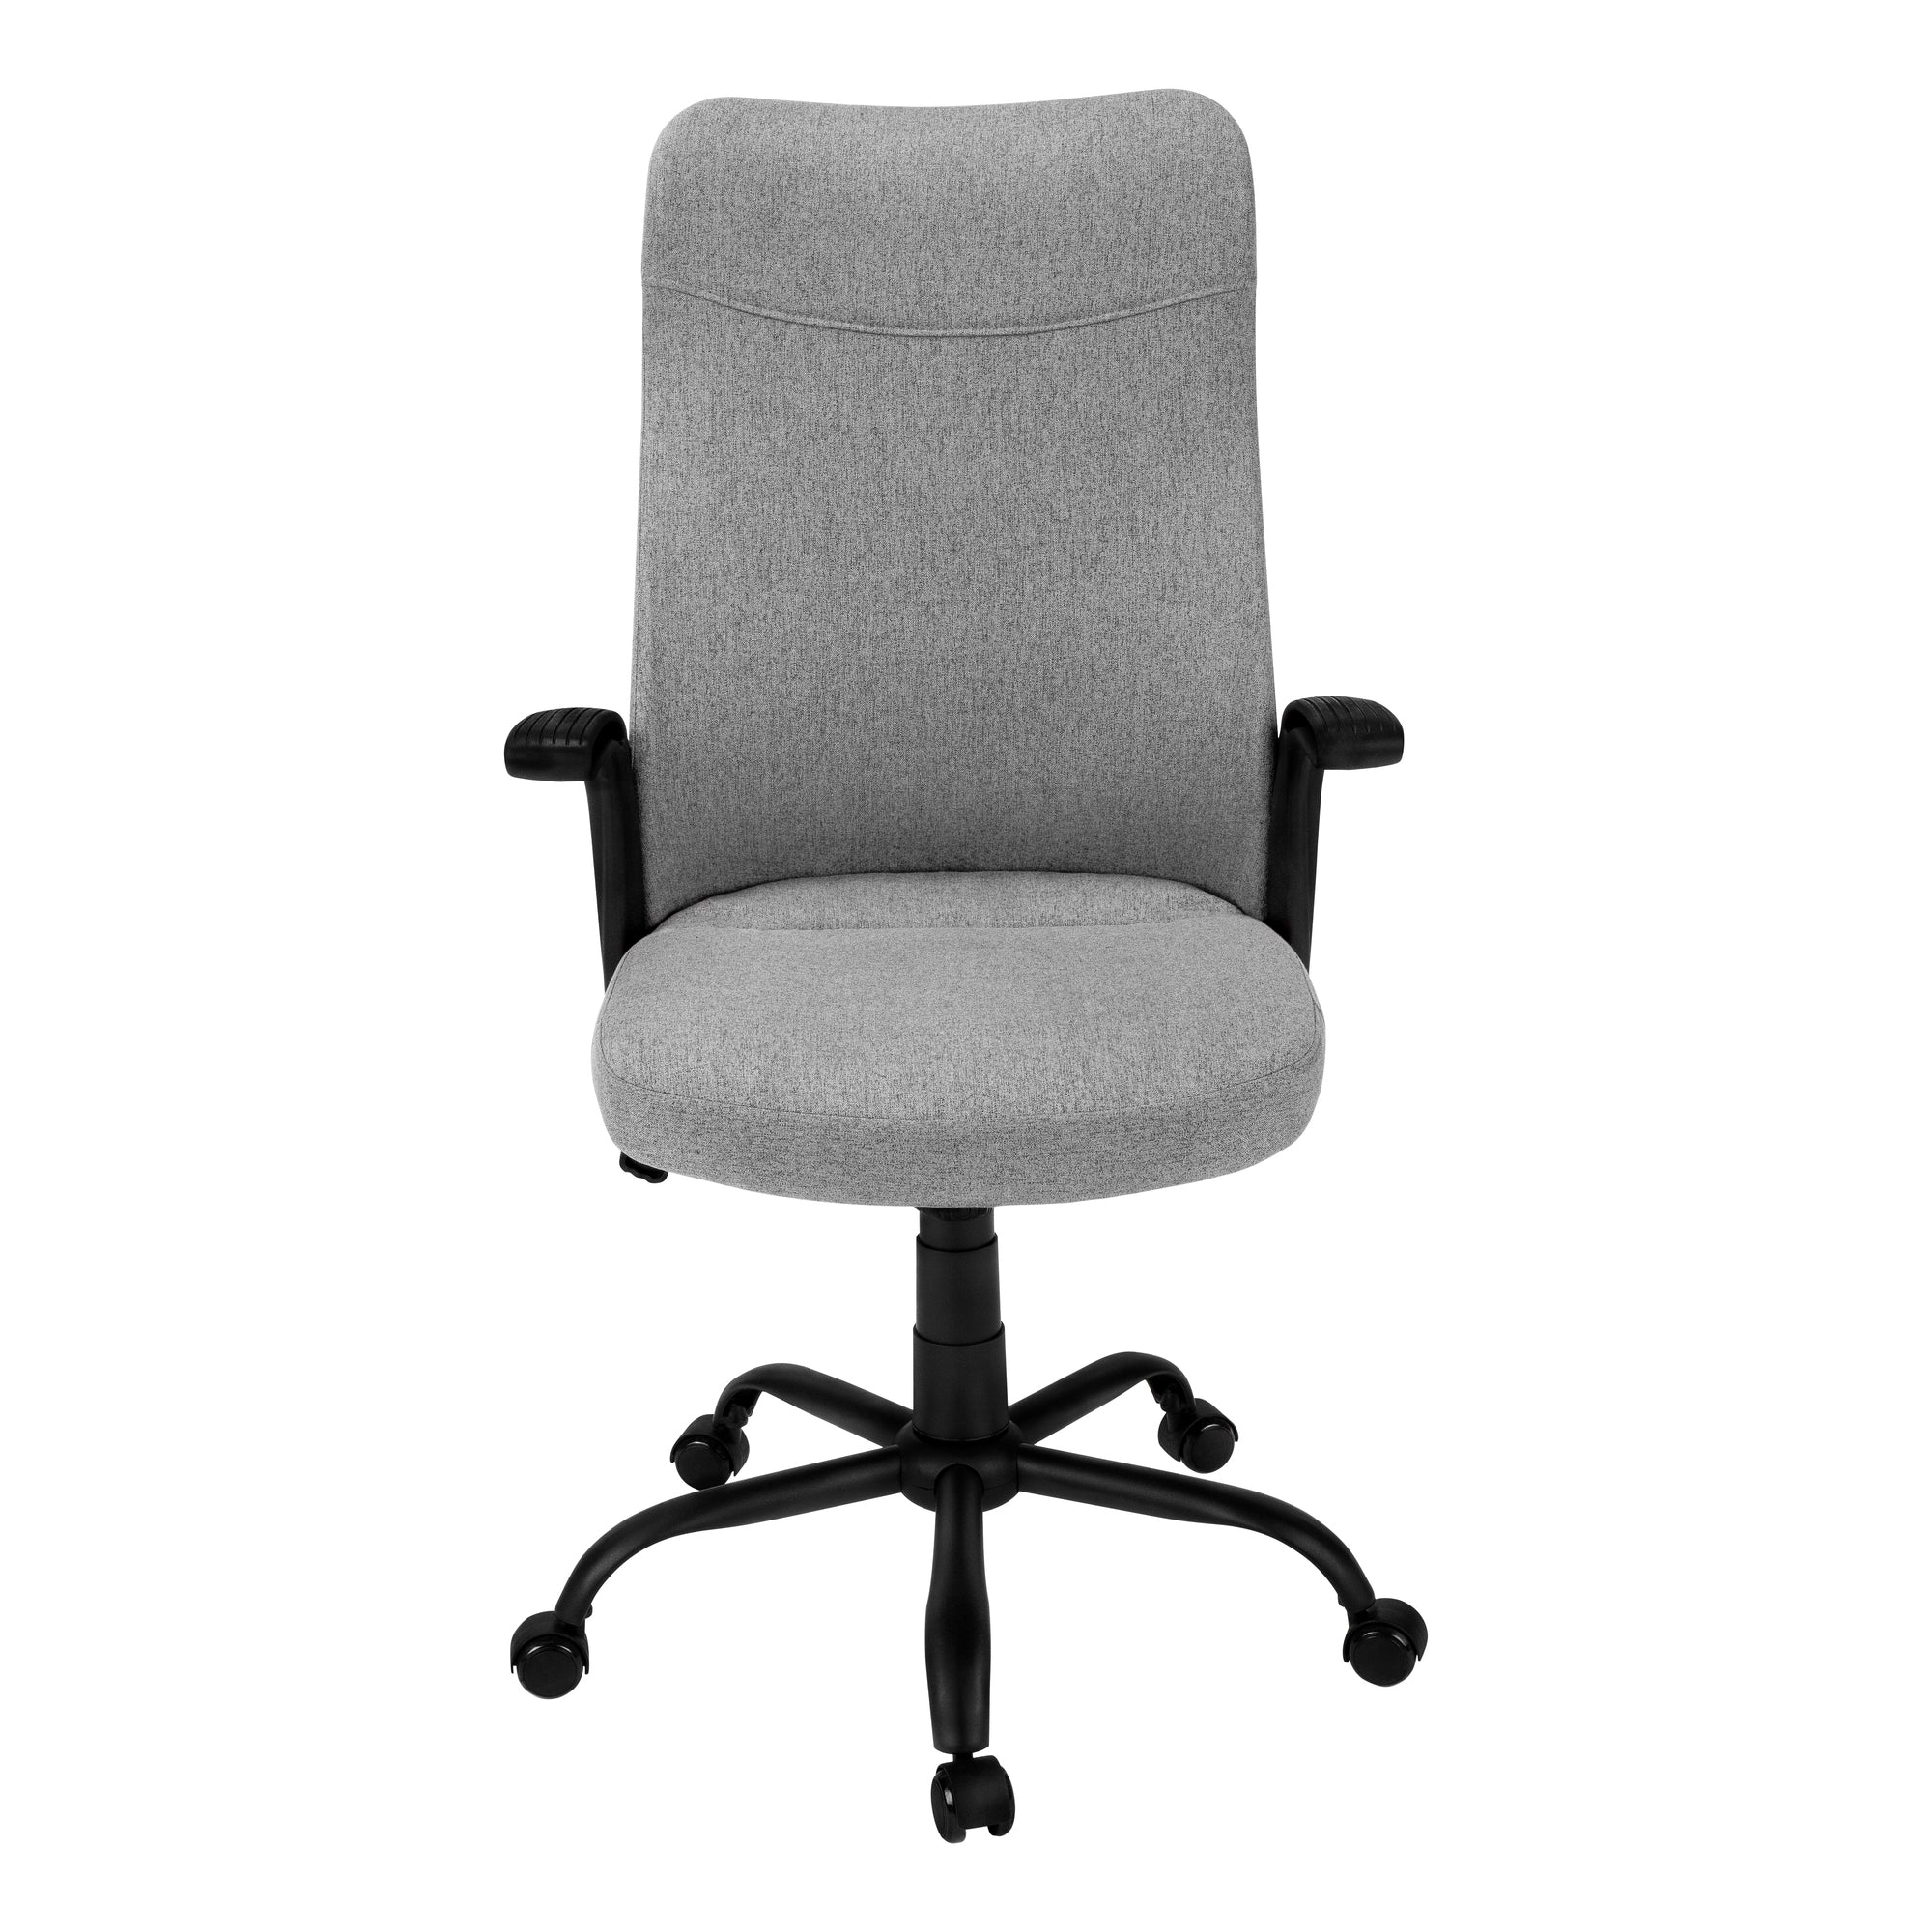 MN-247325    Office Chair, Adjustable Height, Swivel, Ergonomic, Armrests, Computer Desk, Office, Metal Base, Fabric, White, Grey, Contemporary, Modern